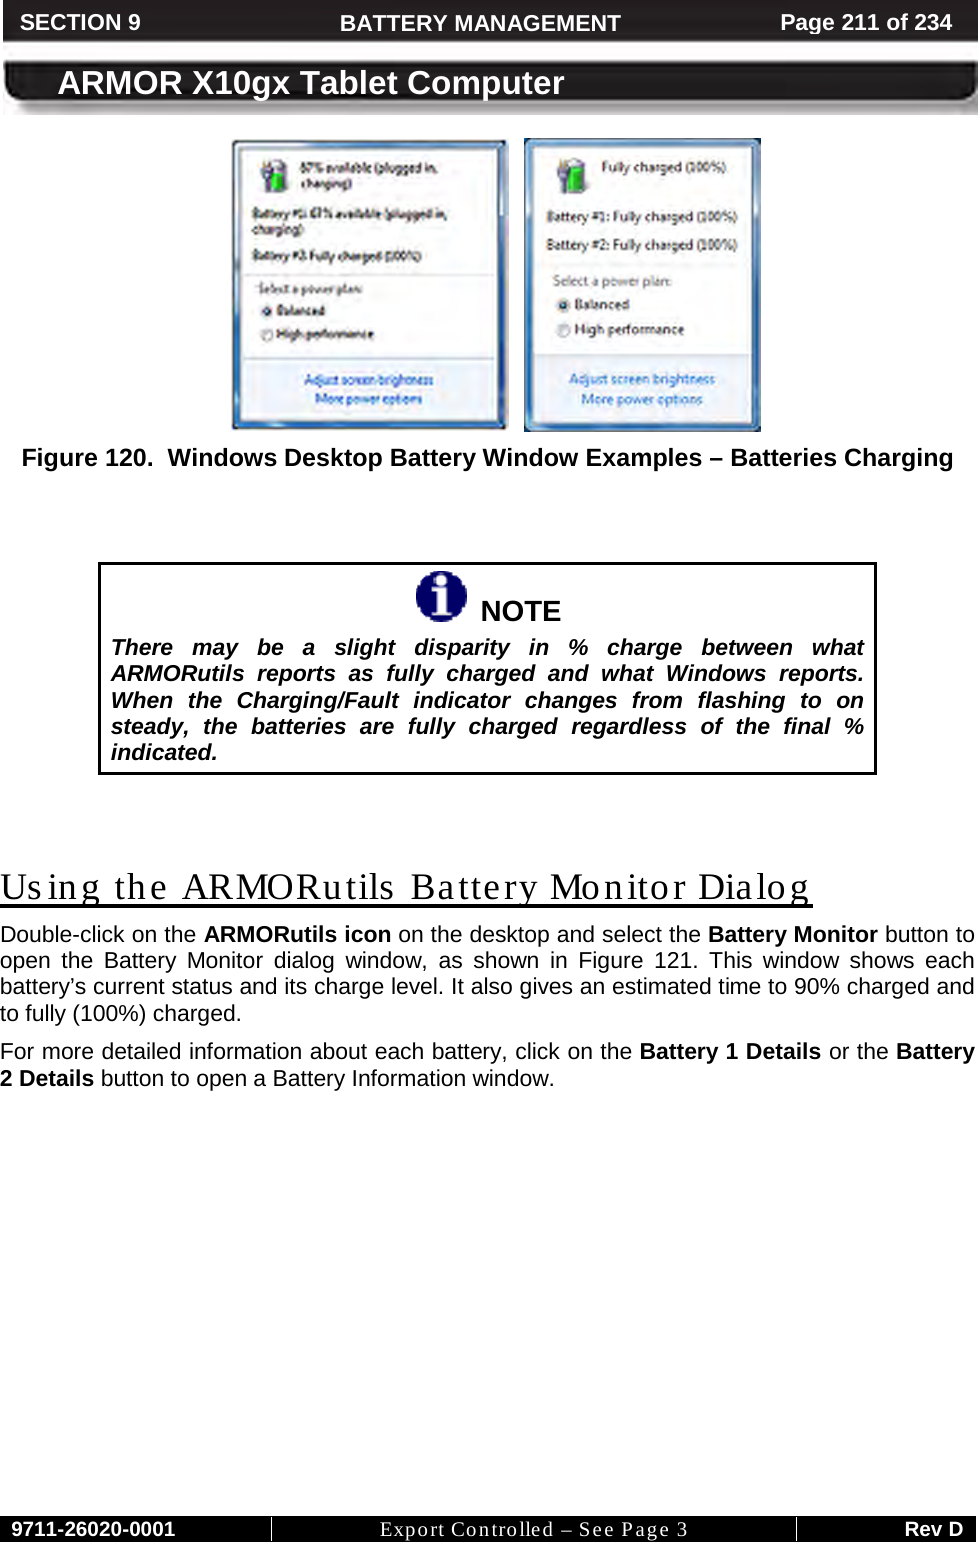     9711-26020-0001 Export Controlled – See Page 3 Rev D SECTION 8 ARMOR X10gx Tablet Computer SECTION 9 BATTERY MANAGEMENT Page 211 of 234  ARMOR X10gx Tablet Computer        Figure 120.  Windows Desktop Battery Window Examples – Batteries Charging     NOTE There may be a slight disparity in % charge between what ARMORutils reports as fully charged and what Windows reports. When the Charging/Fault indicator changes from flashing to on steady, the batteries are fully charged regardless of the final % indicated.   Using the ARMORutils  Battery Monitor Dialog Double-click on the ARMORutils icon on the desktop and select the Battery Monitor button to open the Battery Monitor dialog window, as shown in Figure  121. This window shows each battery’s current status and its charge level. It also gives an estimated time to 90% charged and to fully (100%) charged. For more detailed information about each battery, click on the Battery 1 Details or the Battery 2 Details button to open a Battery Information window.  